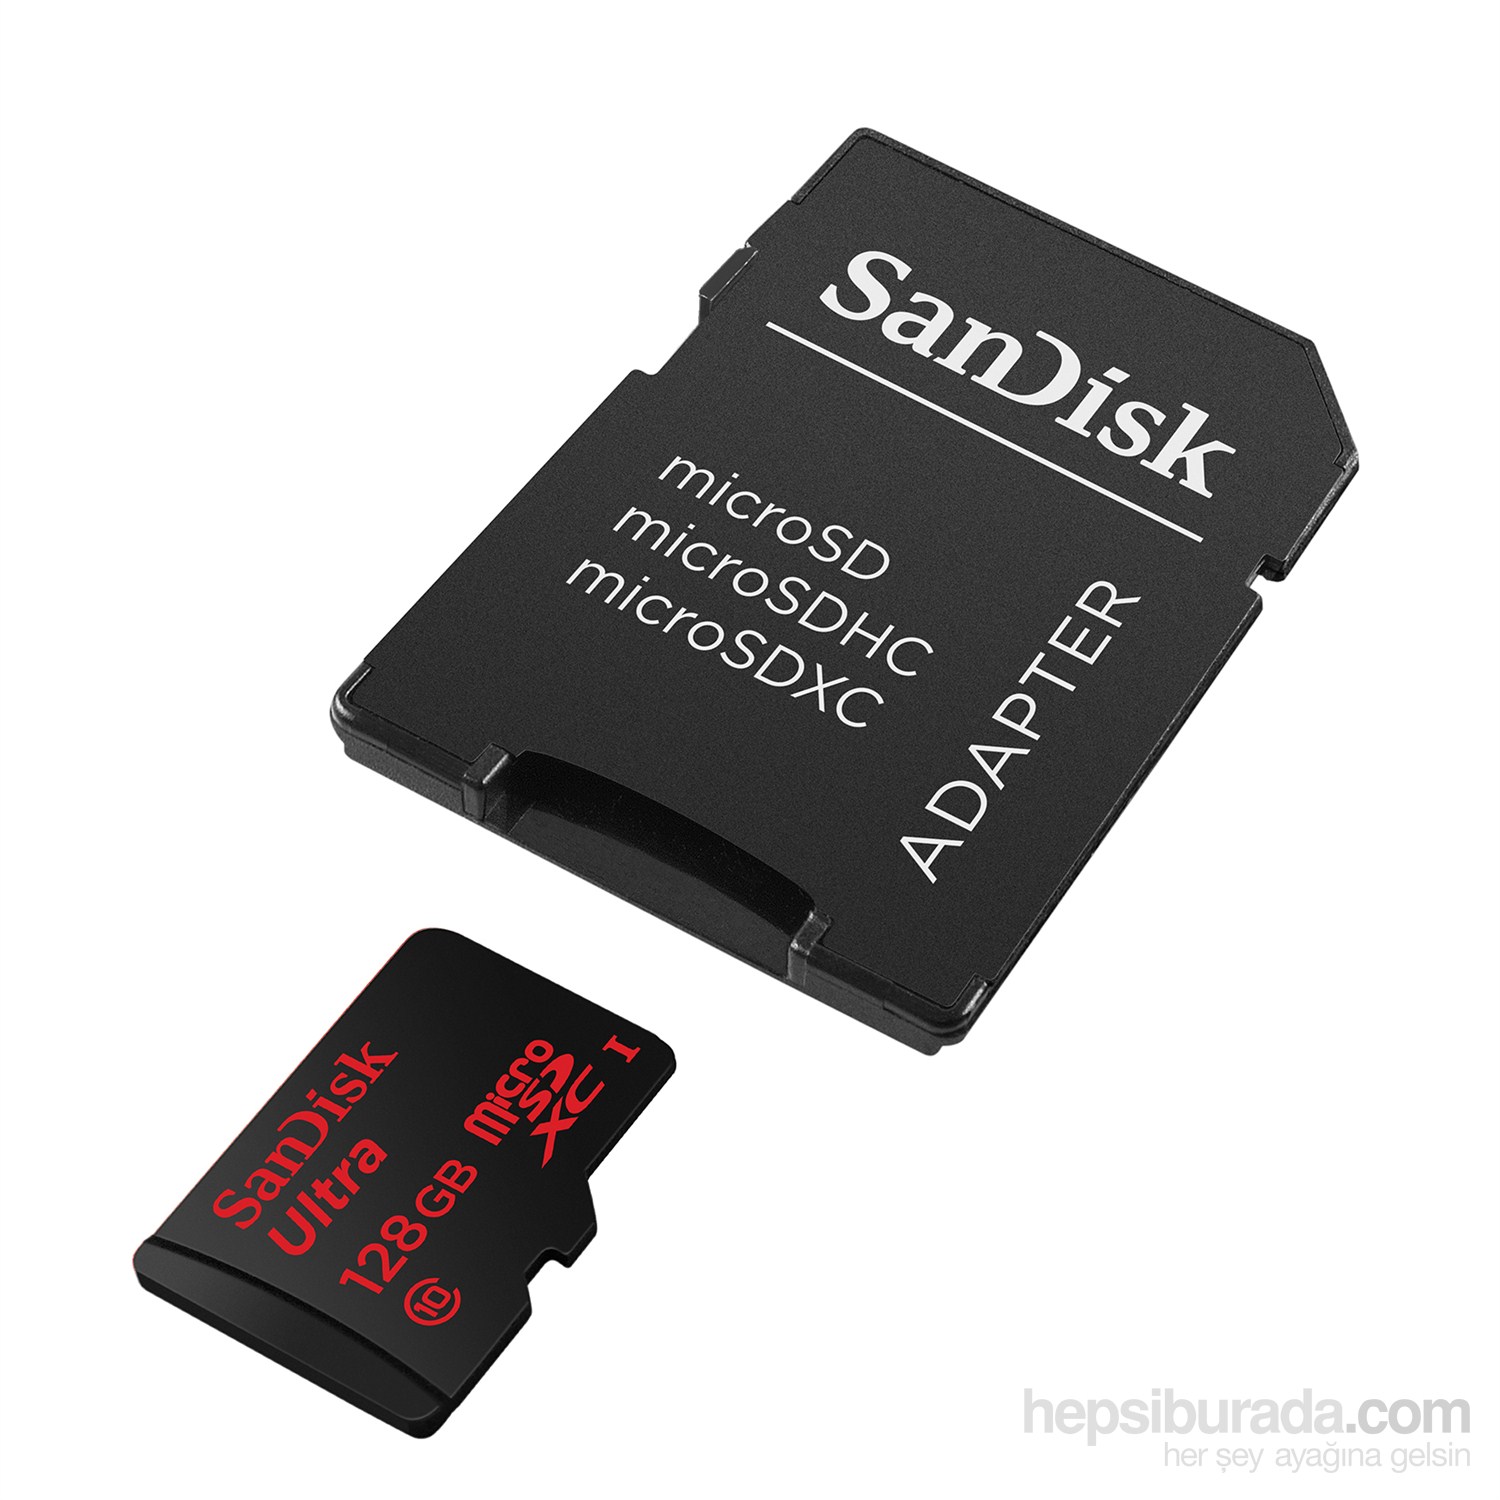 Sandisk Ultra Android microSDXC 128GB + SD Adapter + Memory Zone Android App 48MB/s Class 10 Hafıza Kartı SDSDQUAN-128G-G4A